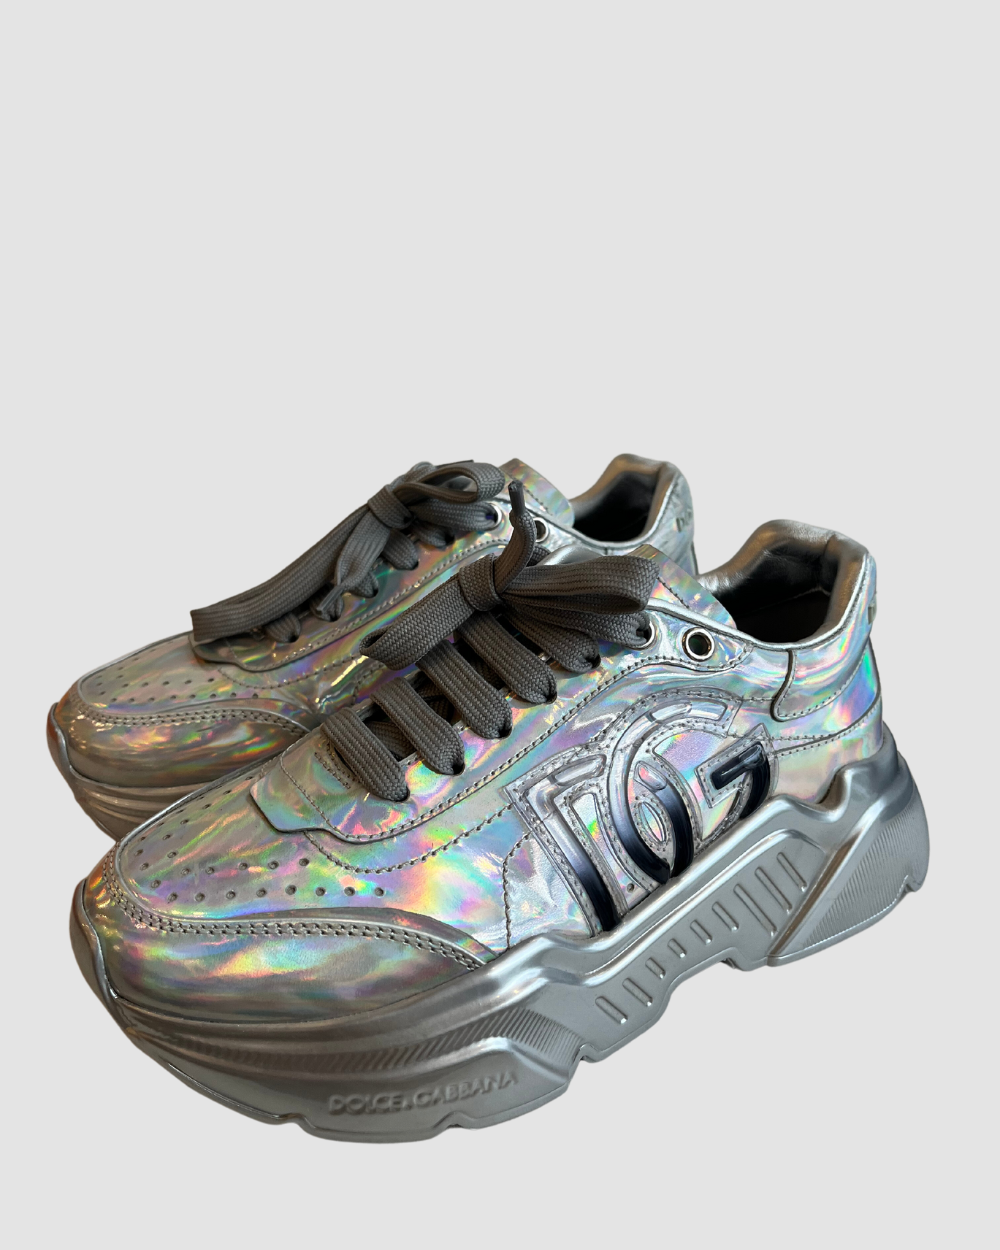 Dolce and Gabbana Holographic Leather Sneakers